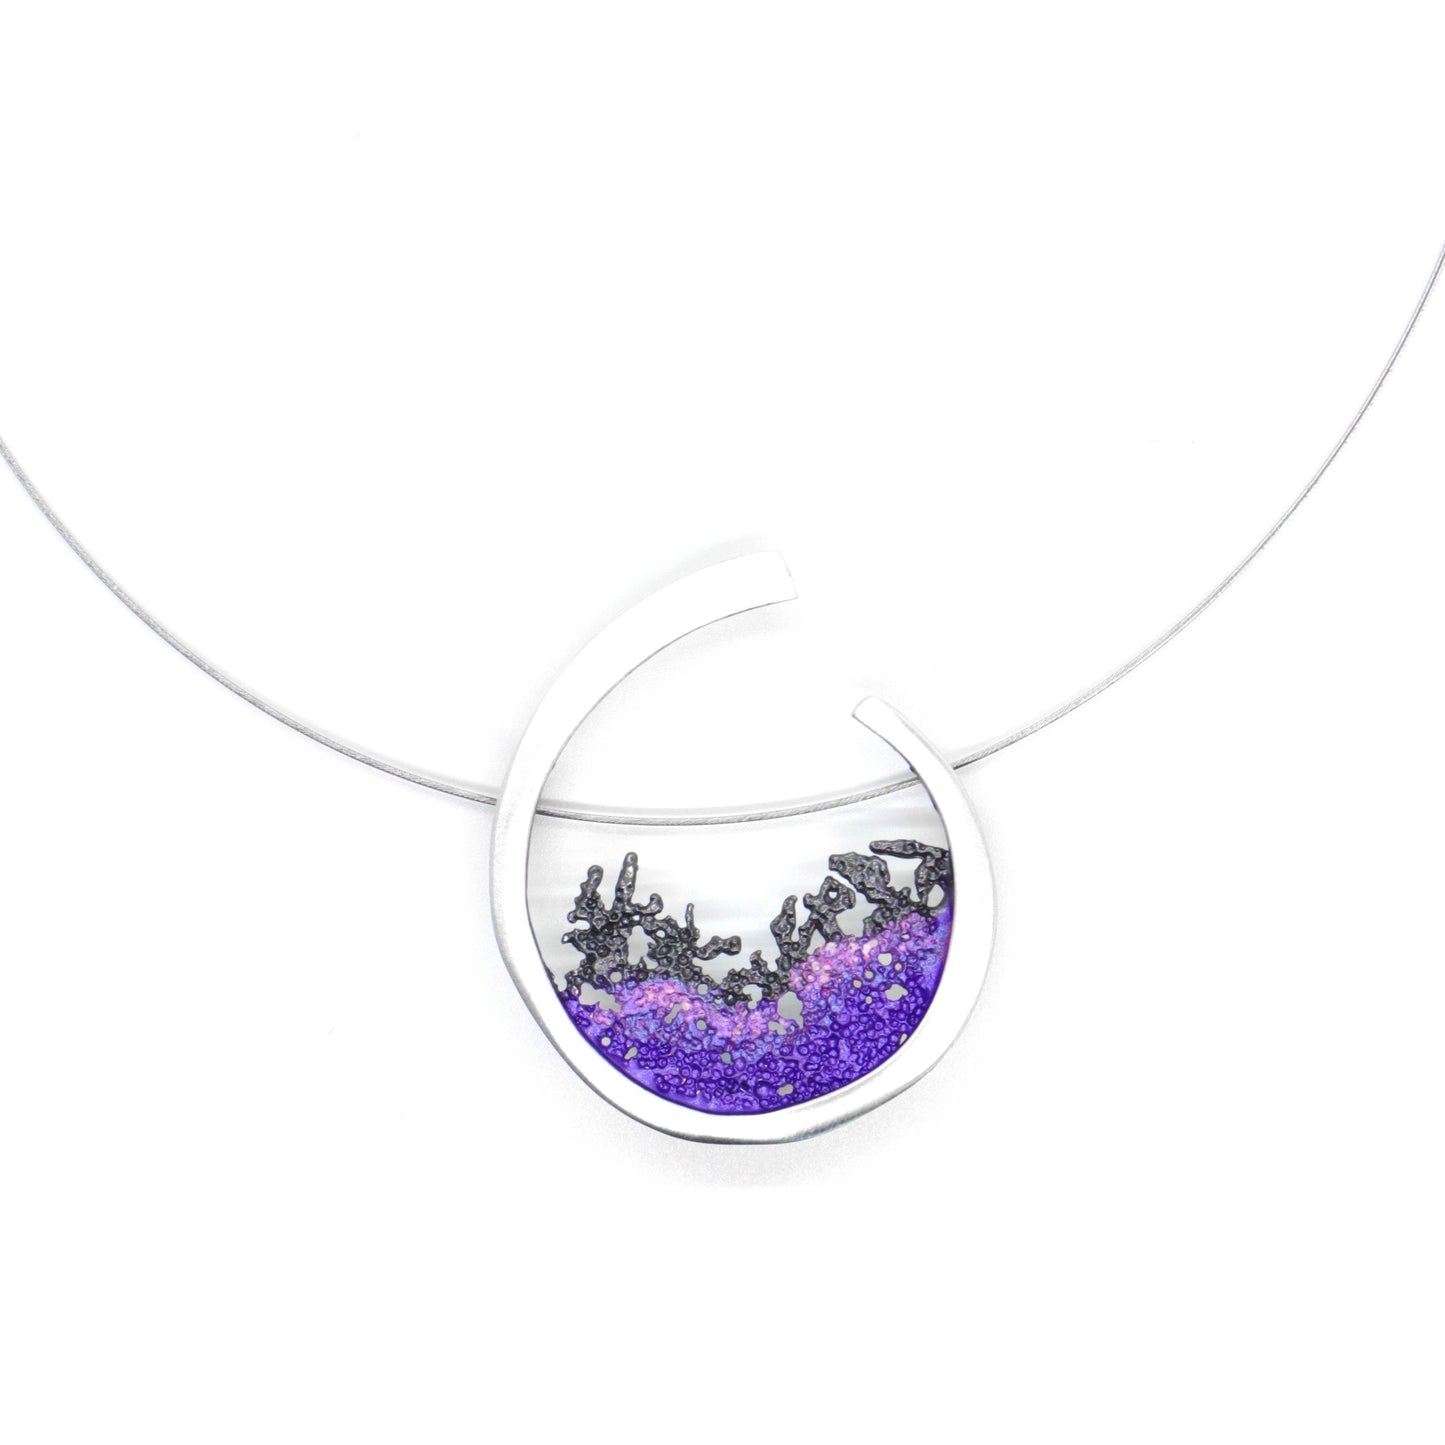 sterling silver wave necklace with natural purple pigment. 16 in stainless steel cable